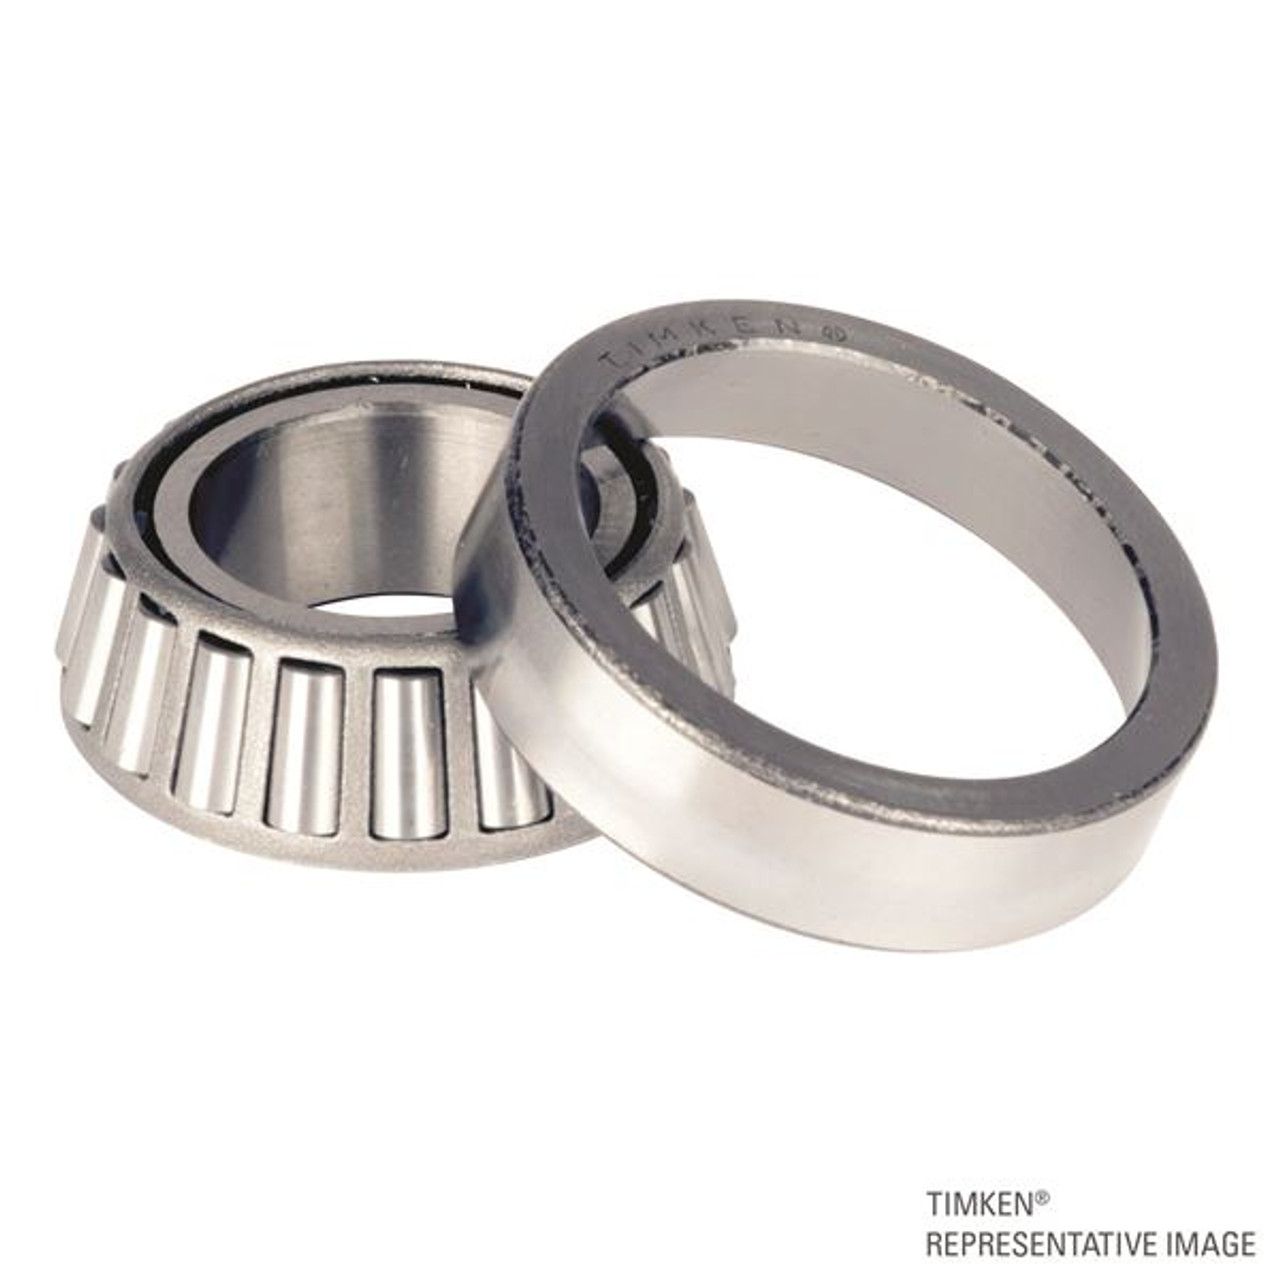 Timken® Single Row Cup & Cone Assembly - Precision Class  52400-90148